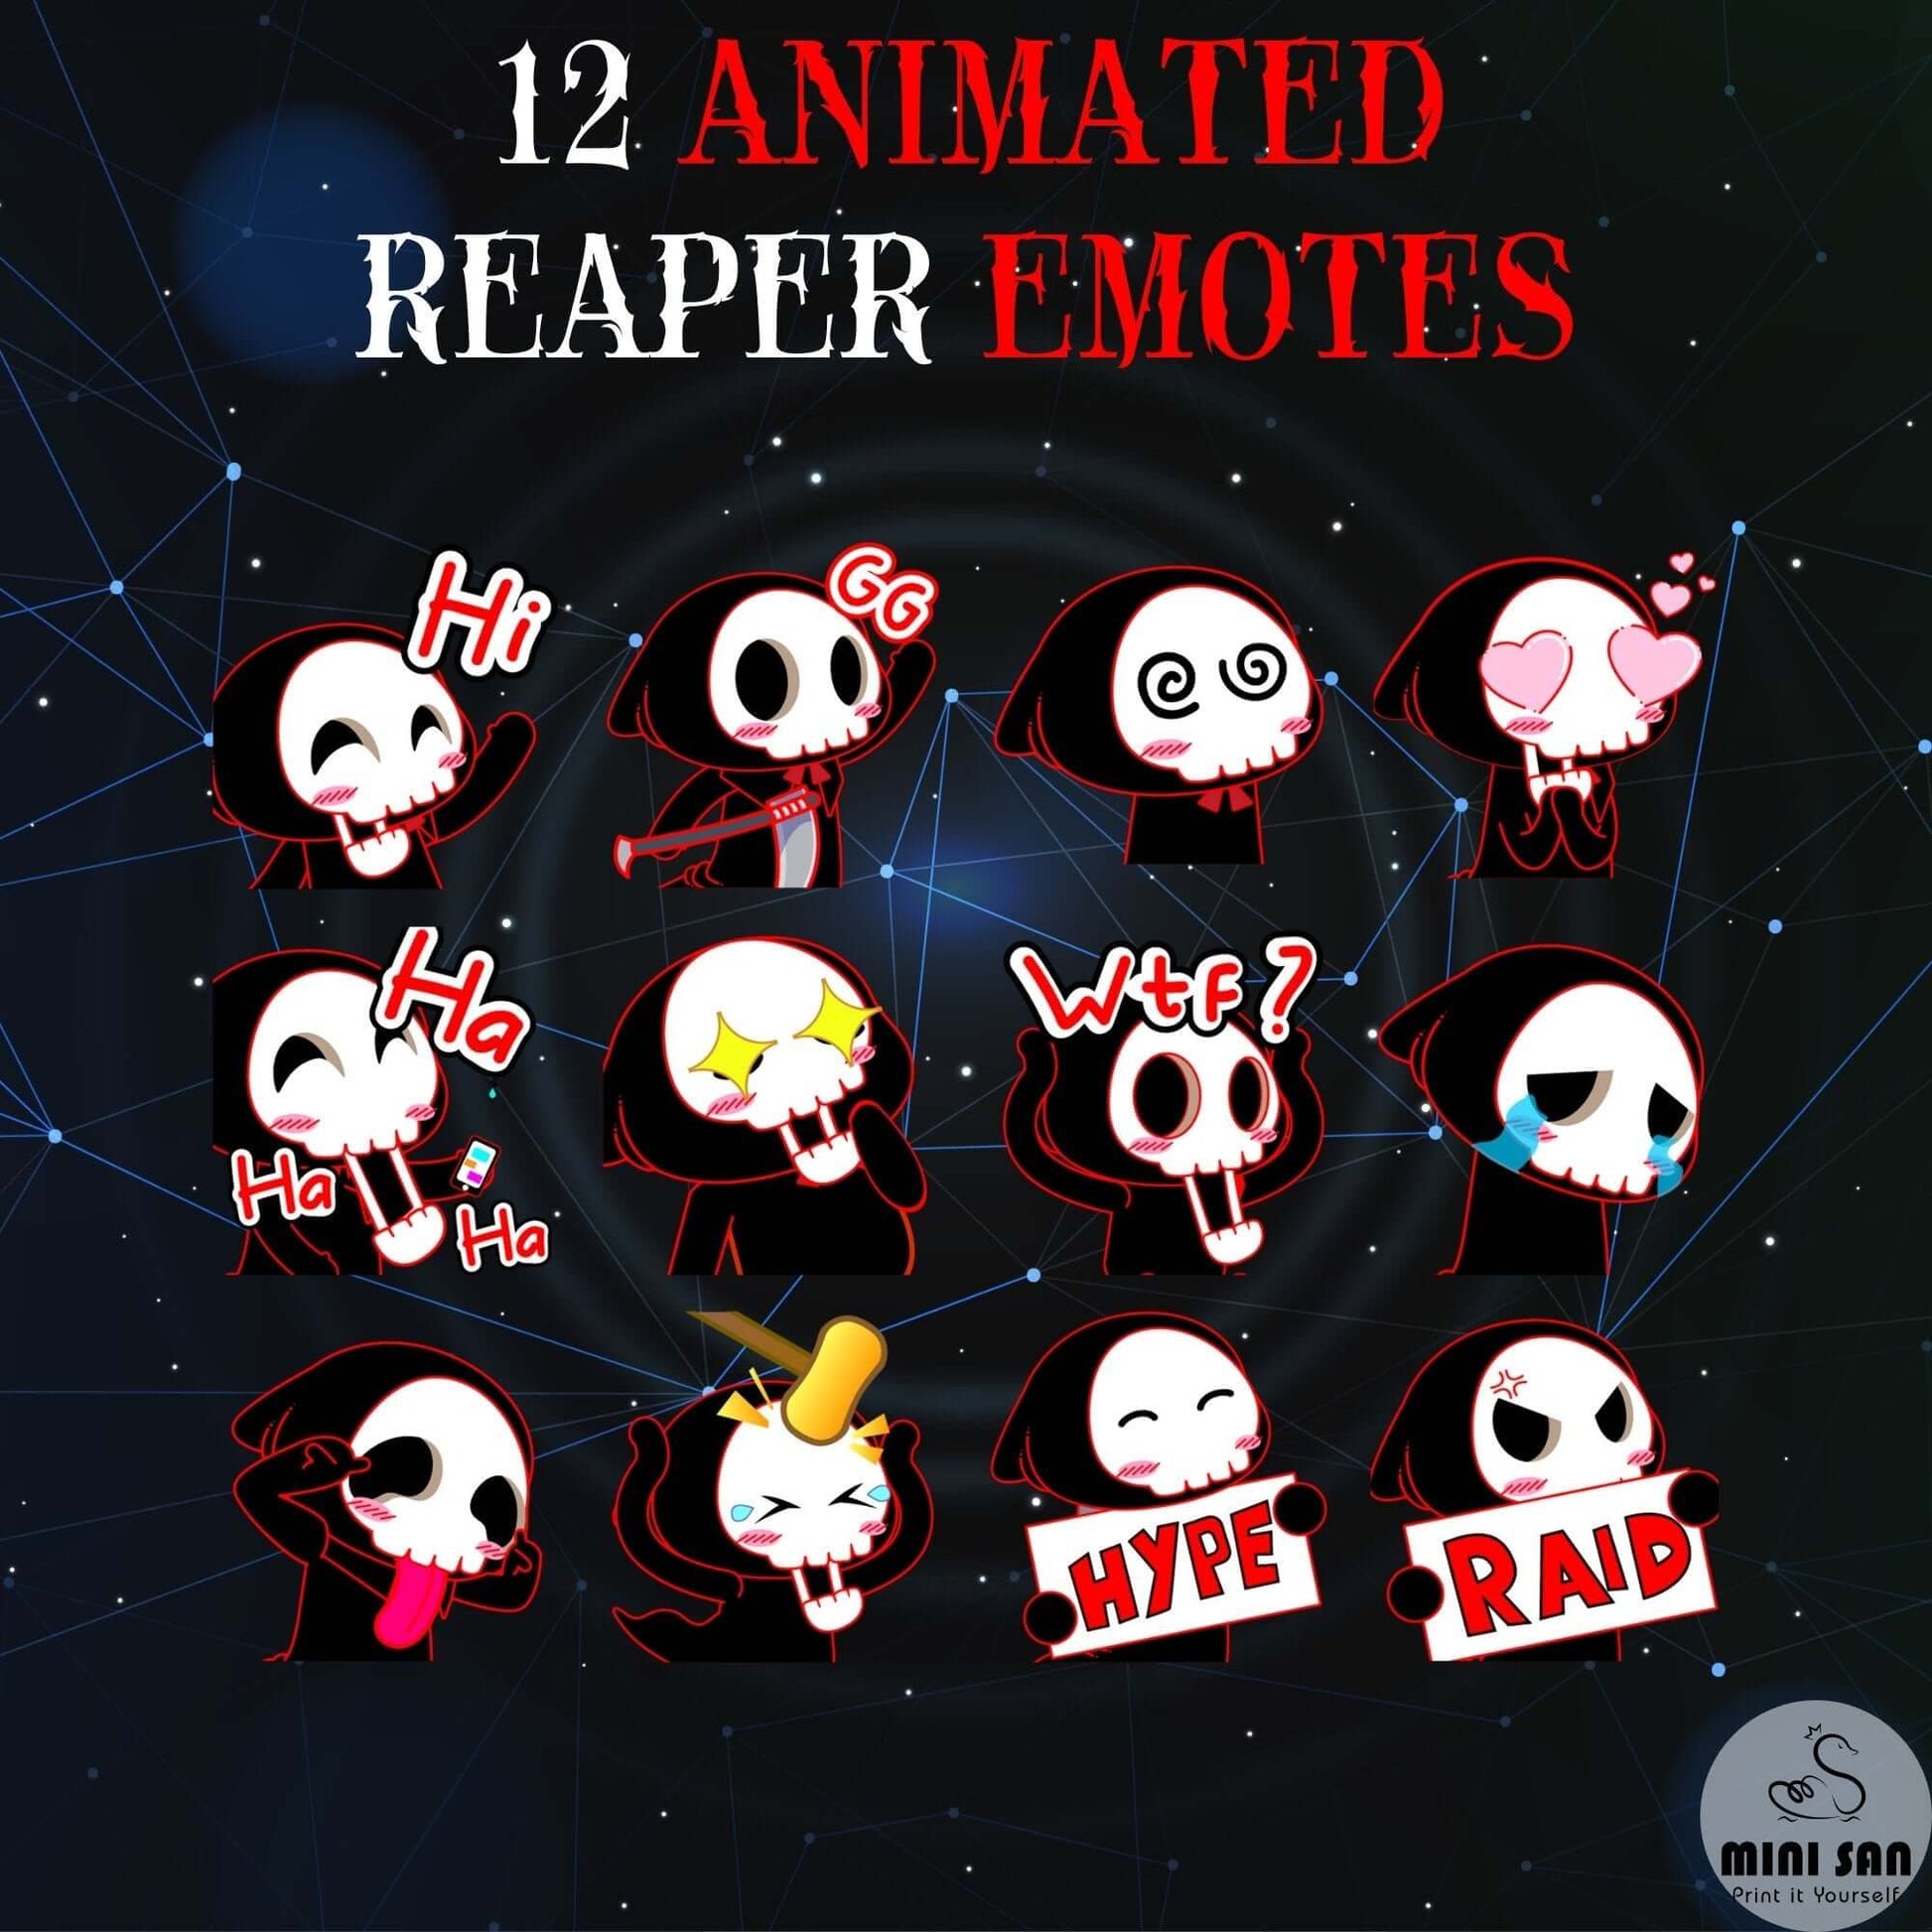 12 Animated Funny Reaper Emotes Pack - Animated Emotes - Stream K-Arts